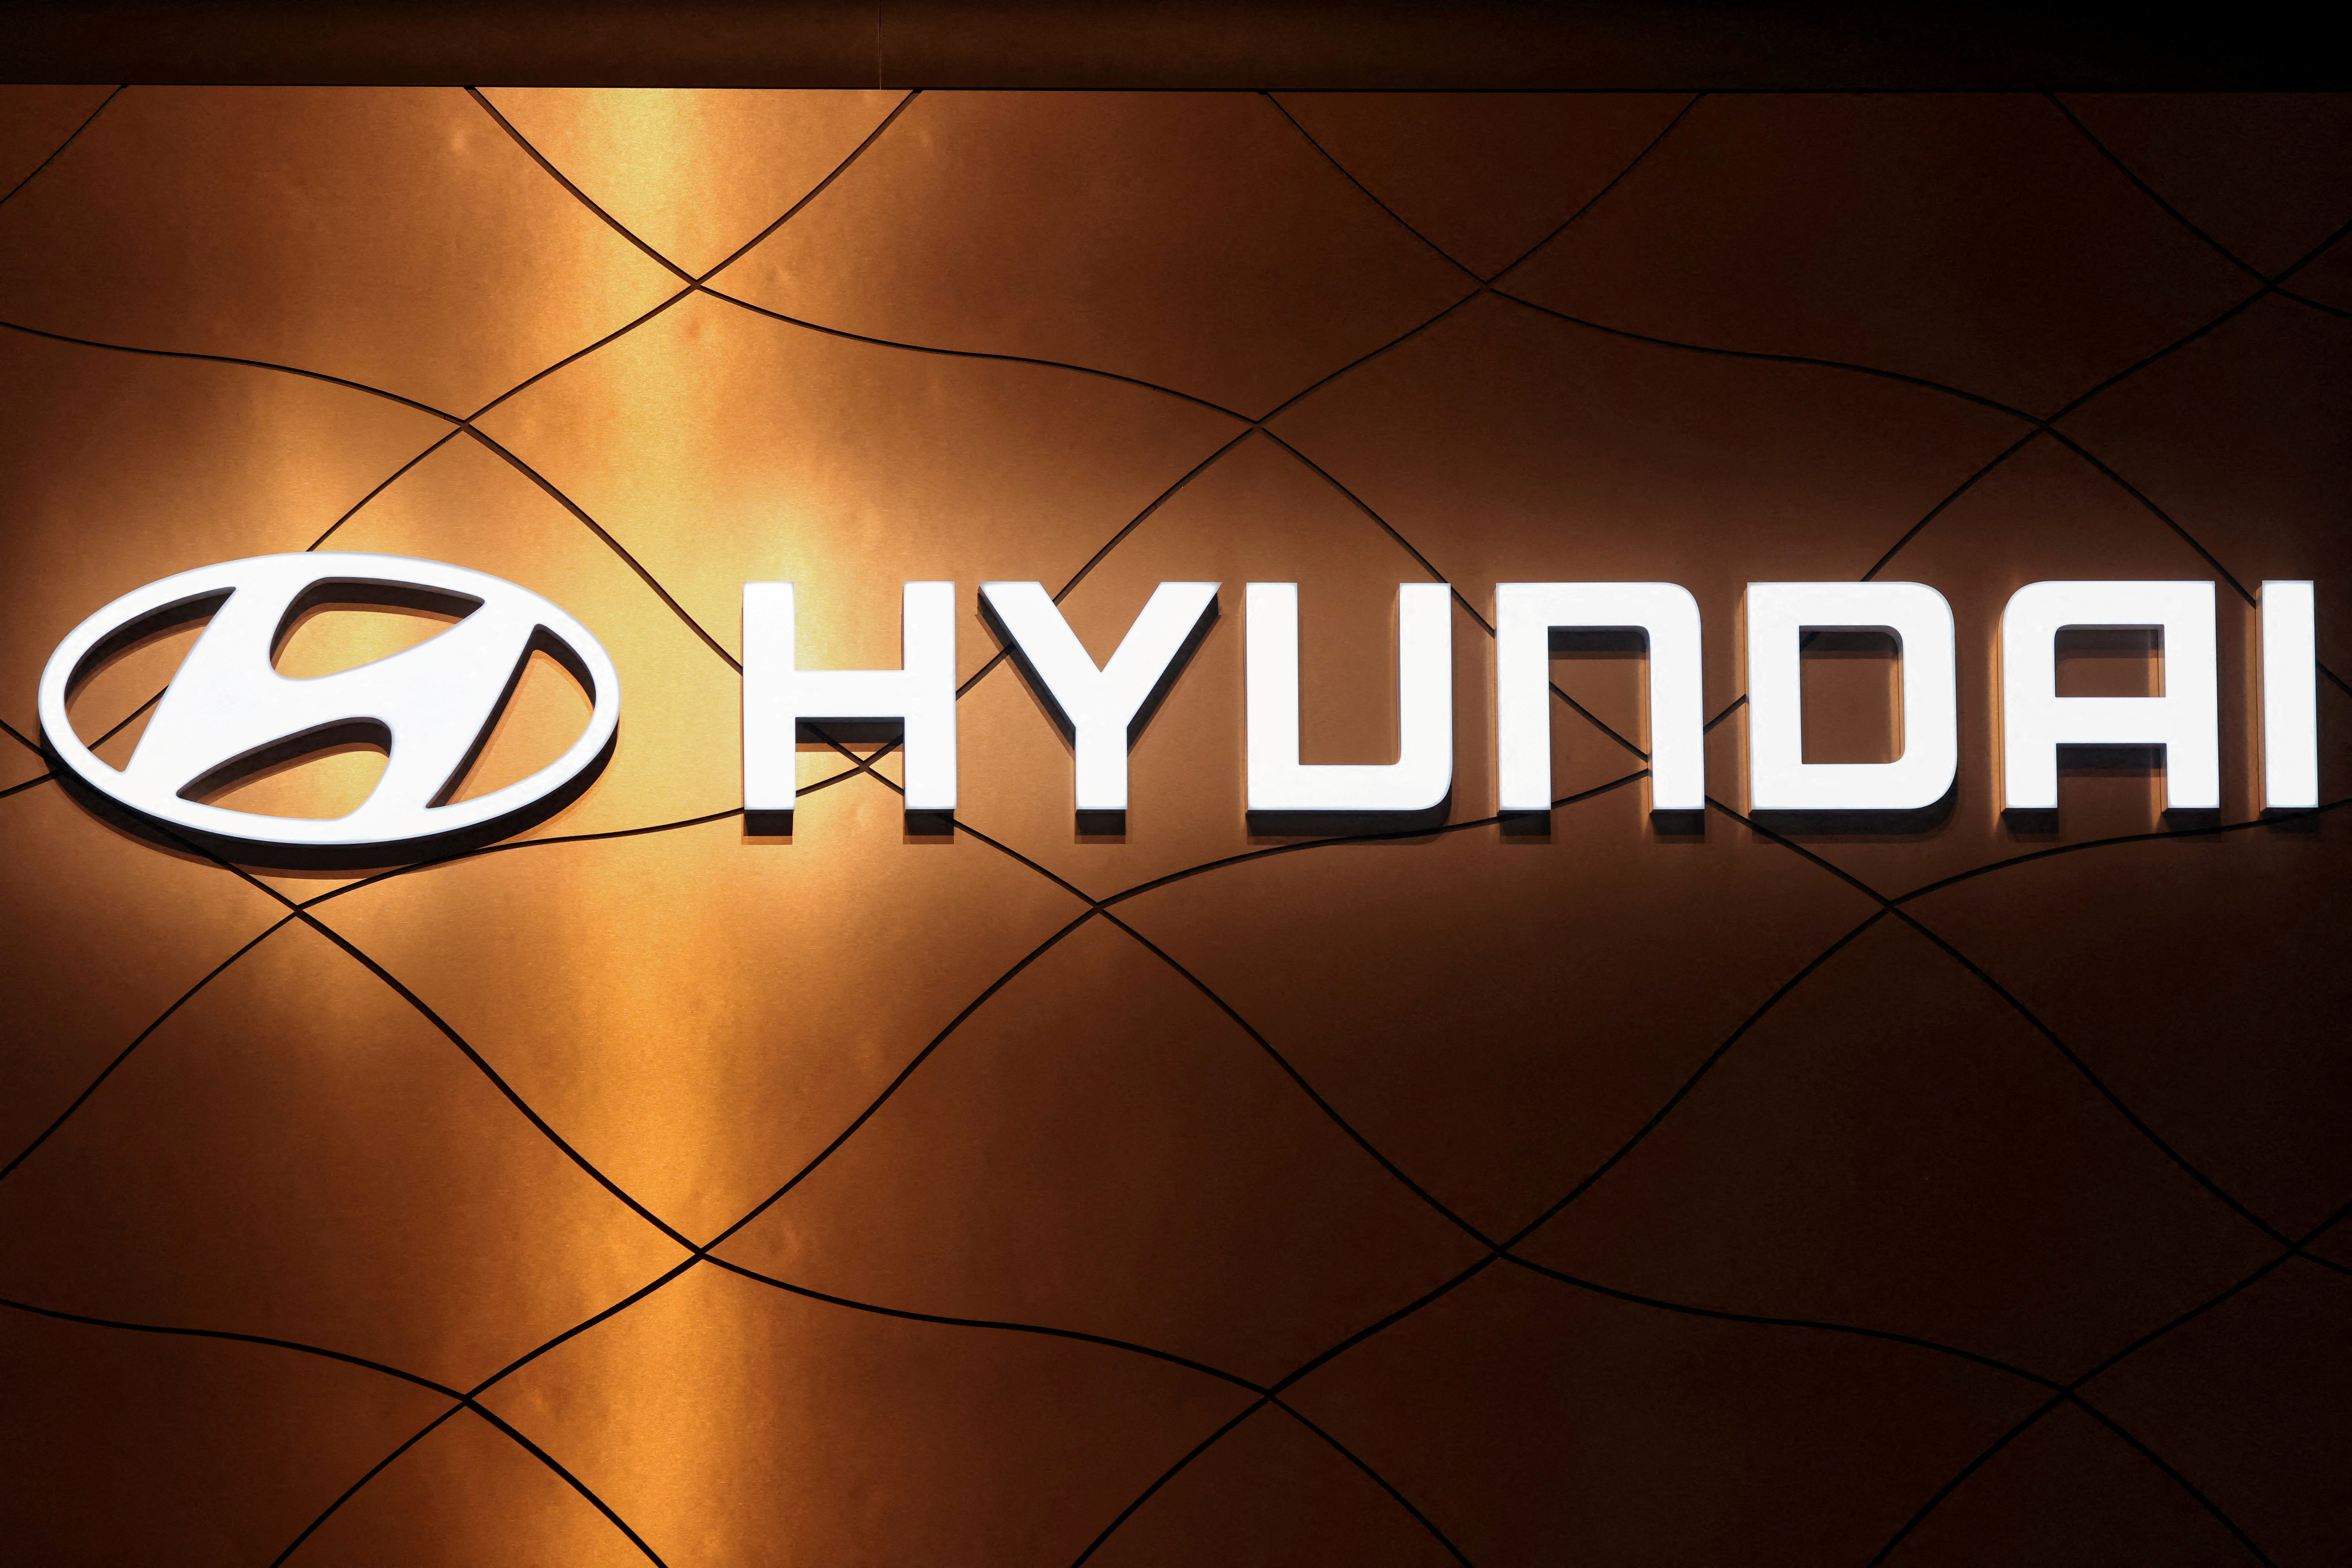 The logo of Hyundai Motor Company is pictured at the New York International Auto Show